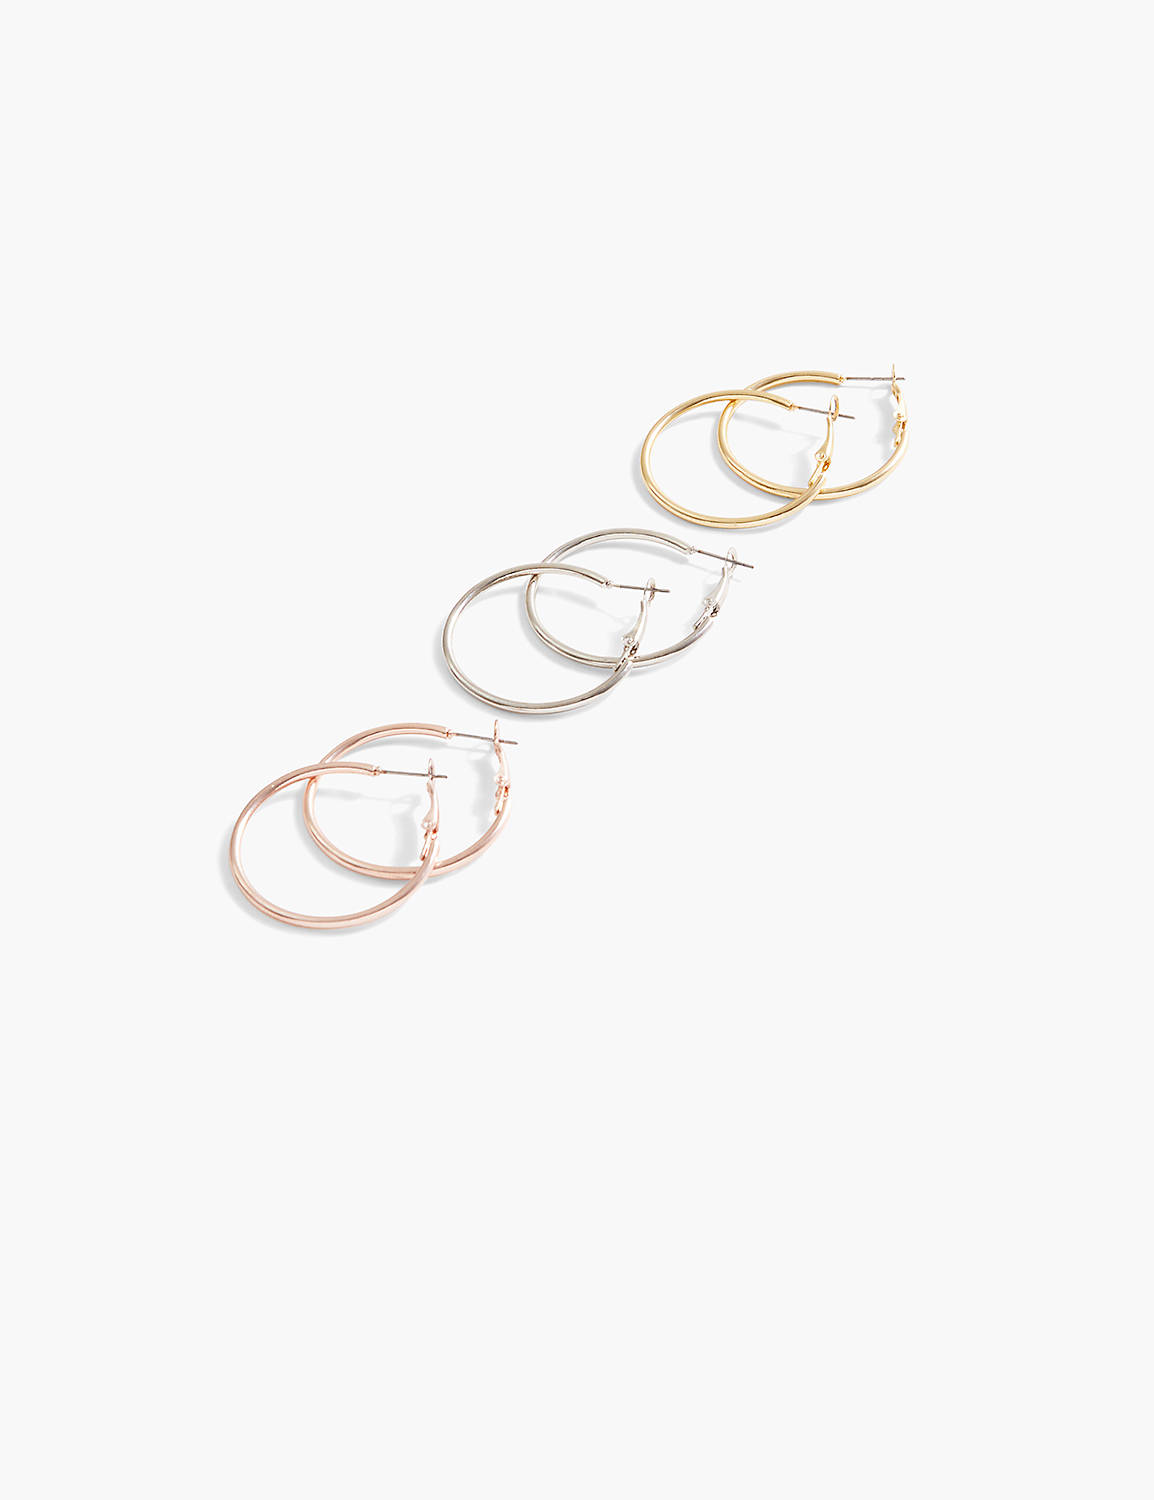 Mixed Metal Small Hoop 3 Pack Earri Product Image 1